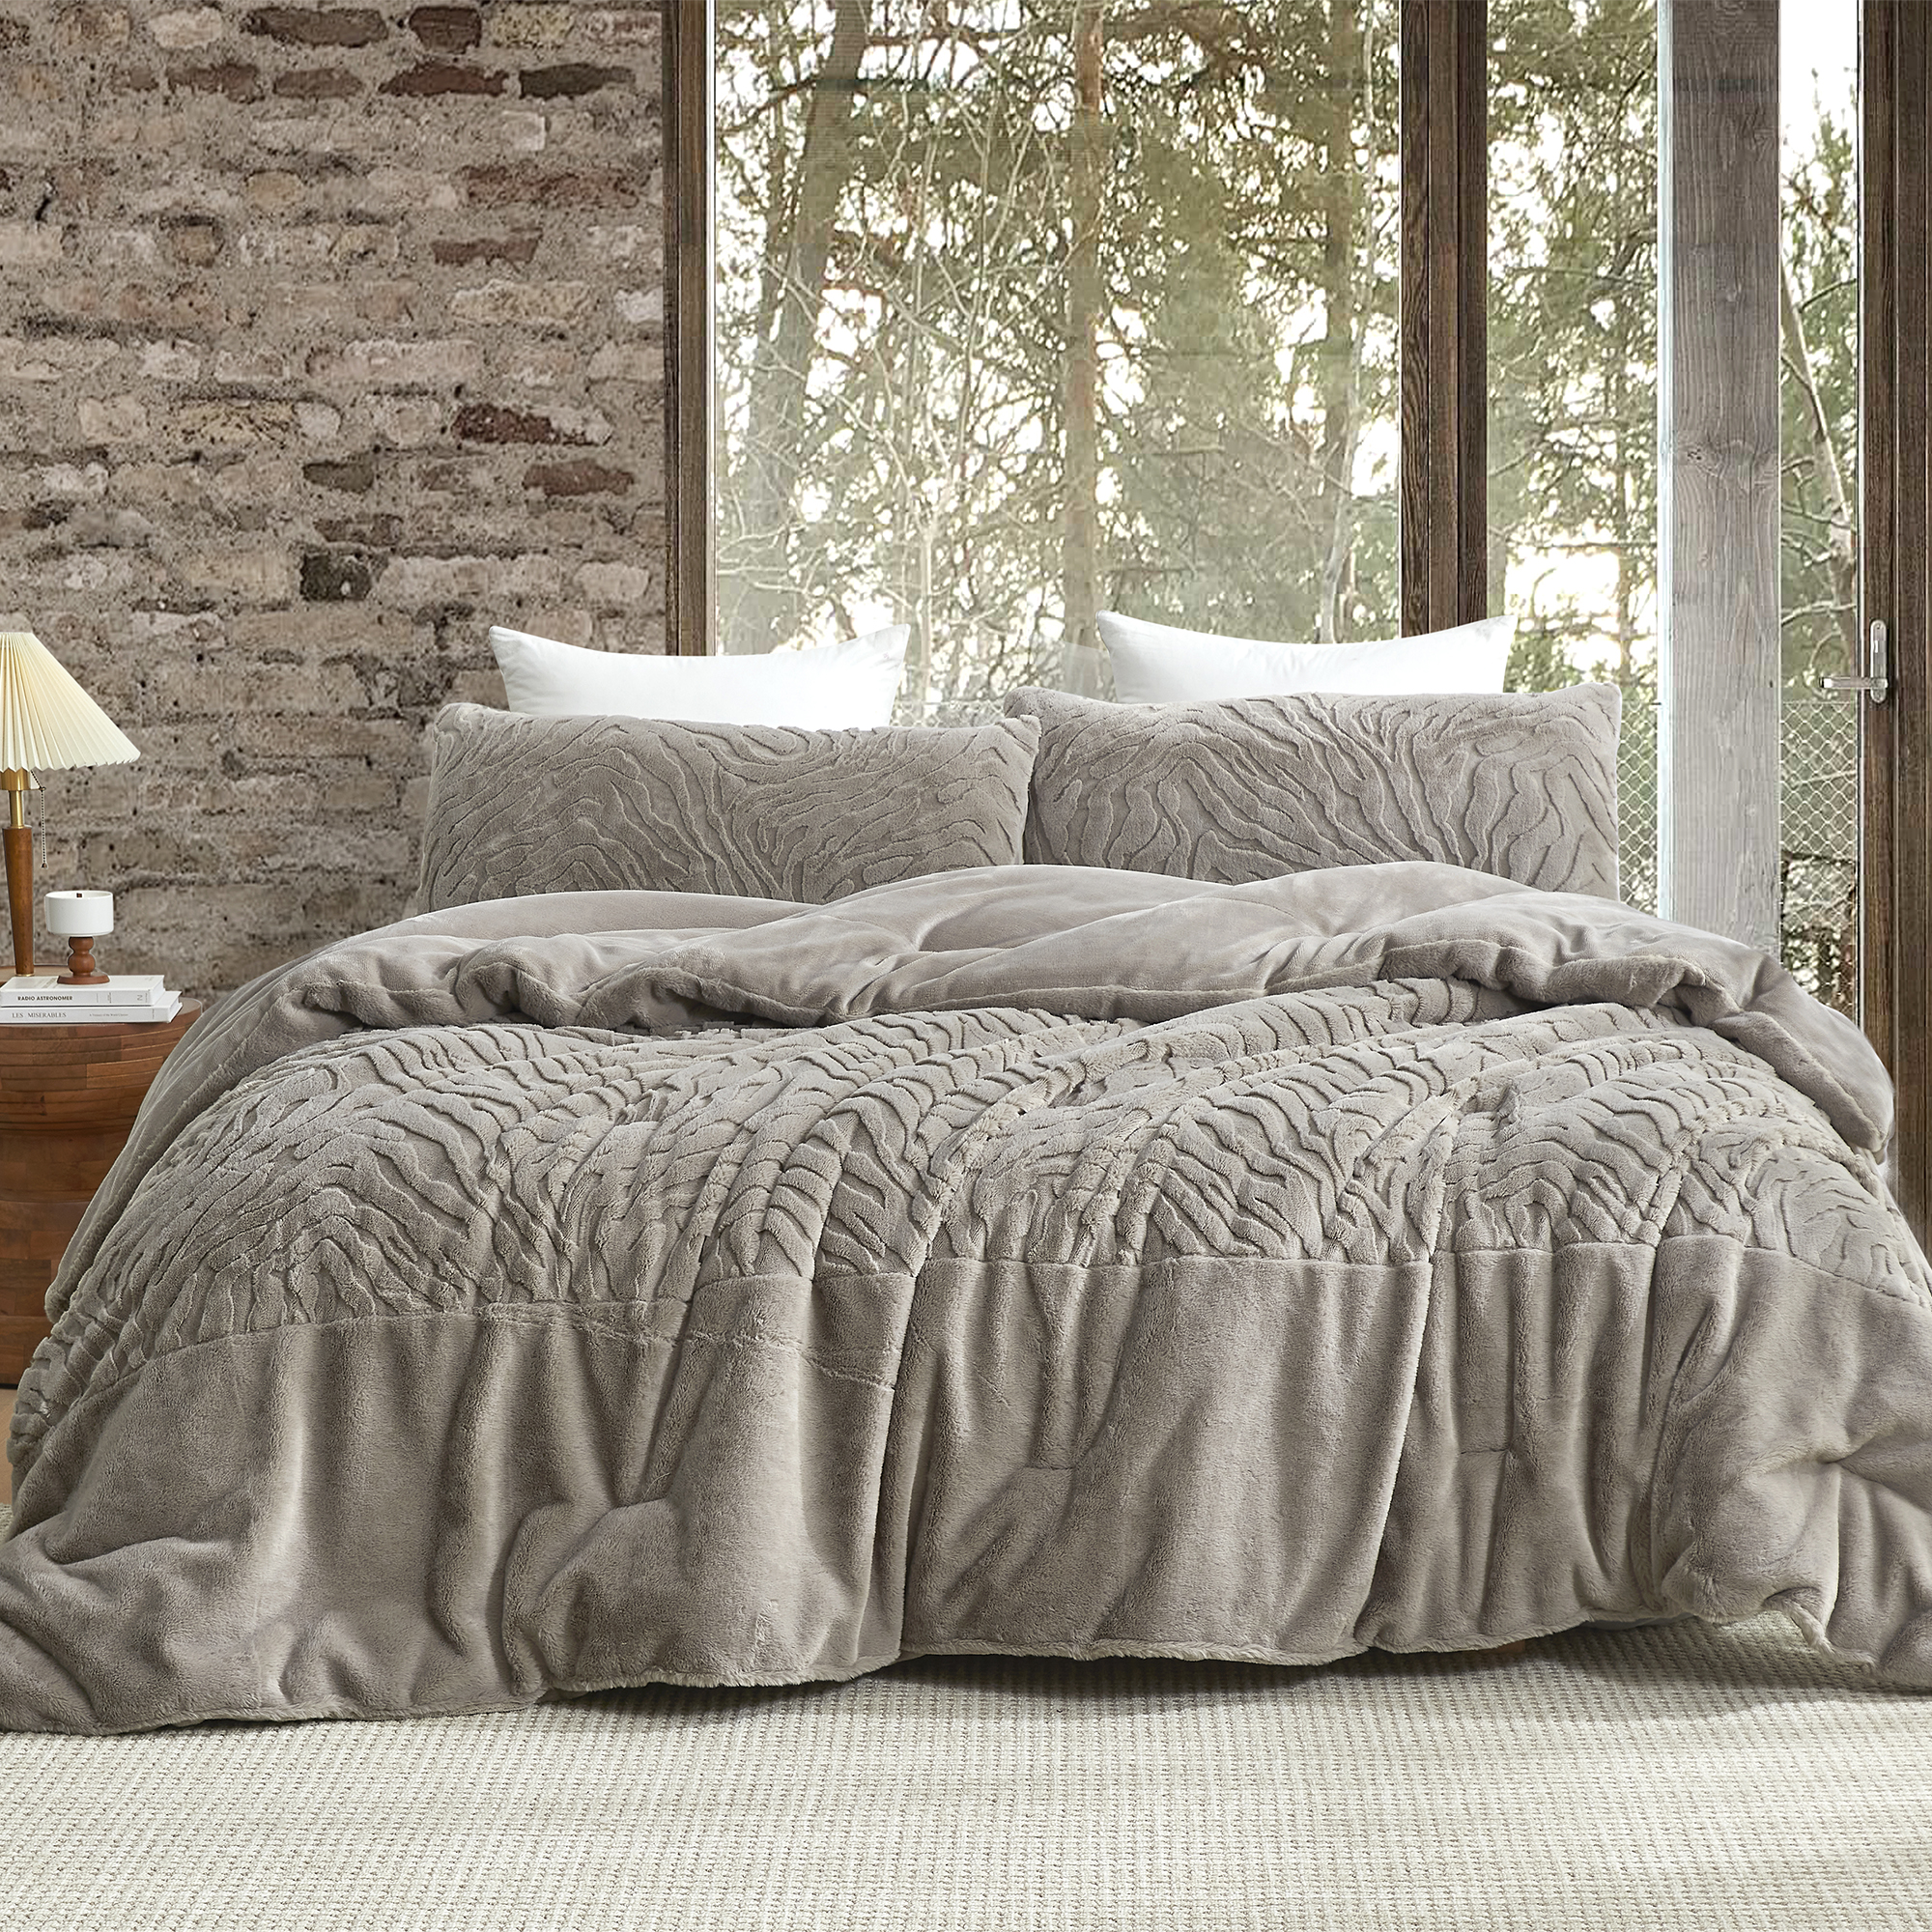 Faded Zebra - Coma Inducer® Oversized Queen Comforter - Pepper Taupe Gray